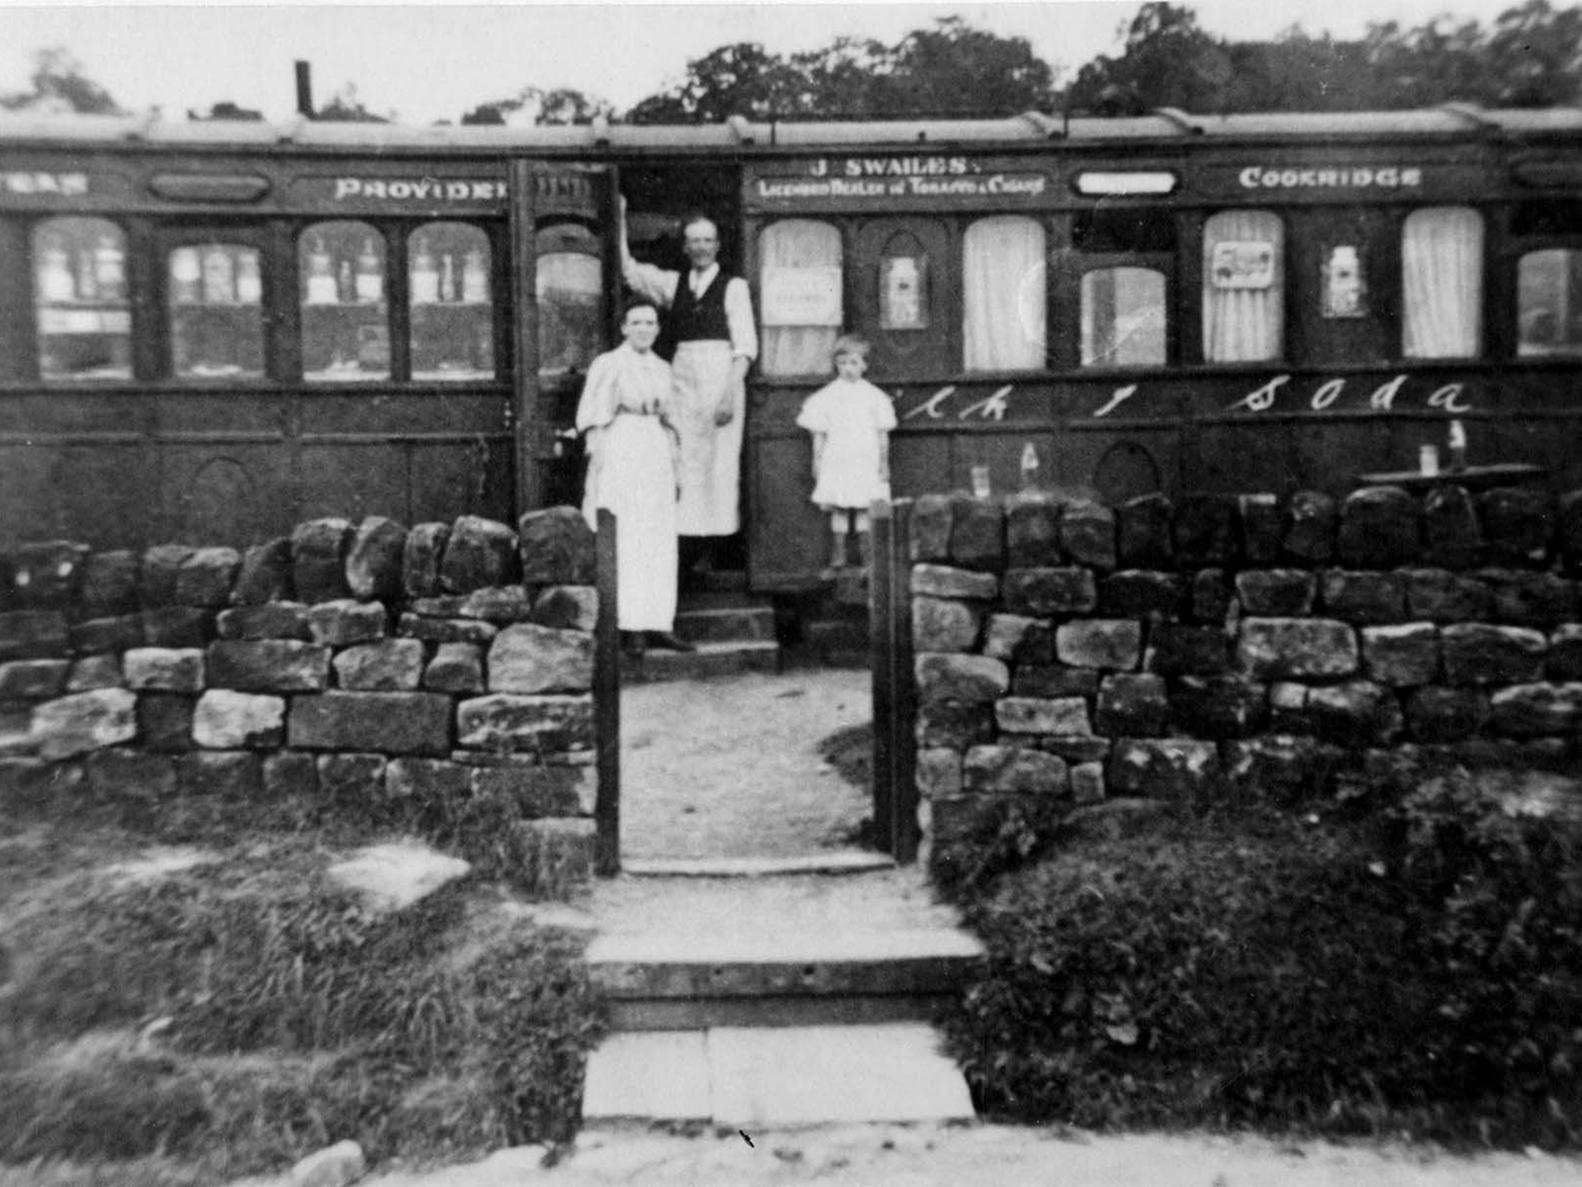 Located on what is now Haigh Wood Road, this cafe was housed in a disused railway carriage. It faced the railway line and was run by J. Swailes. Visitors to Cookridge Hospital would call for refreshments.